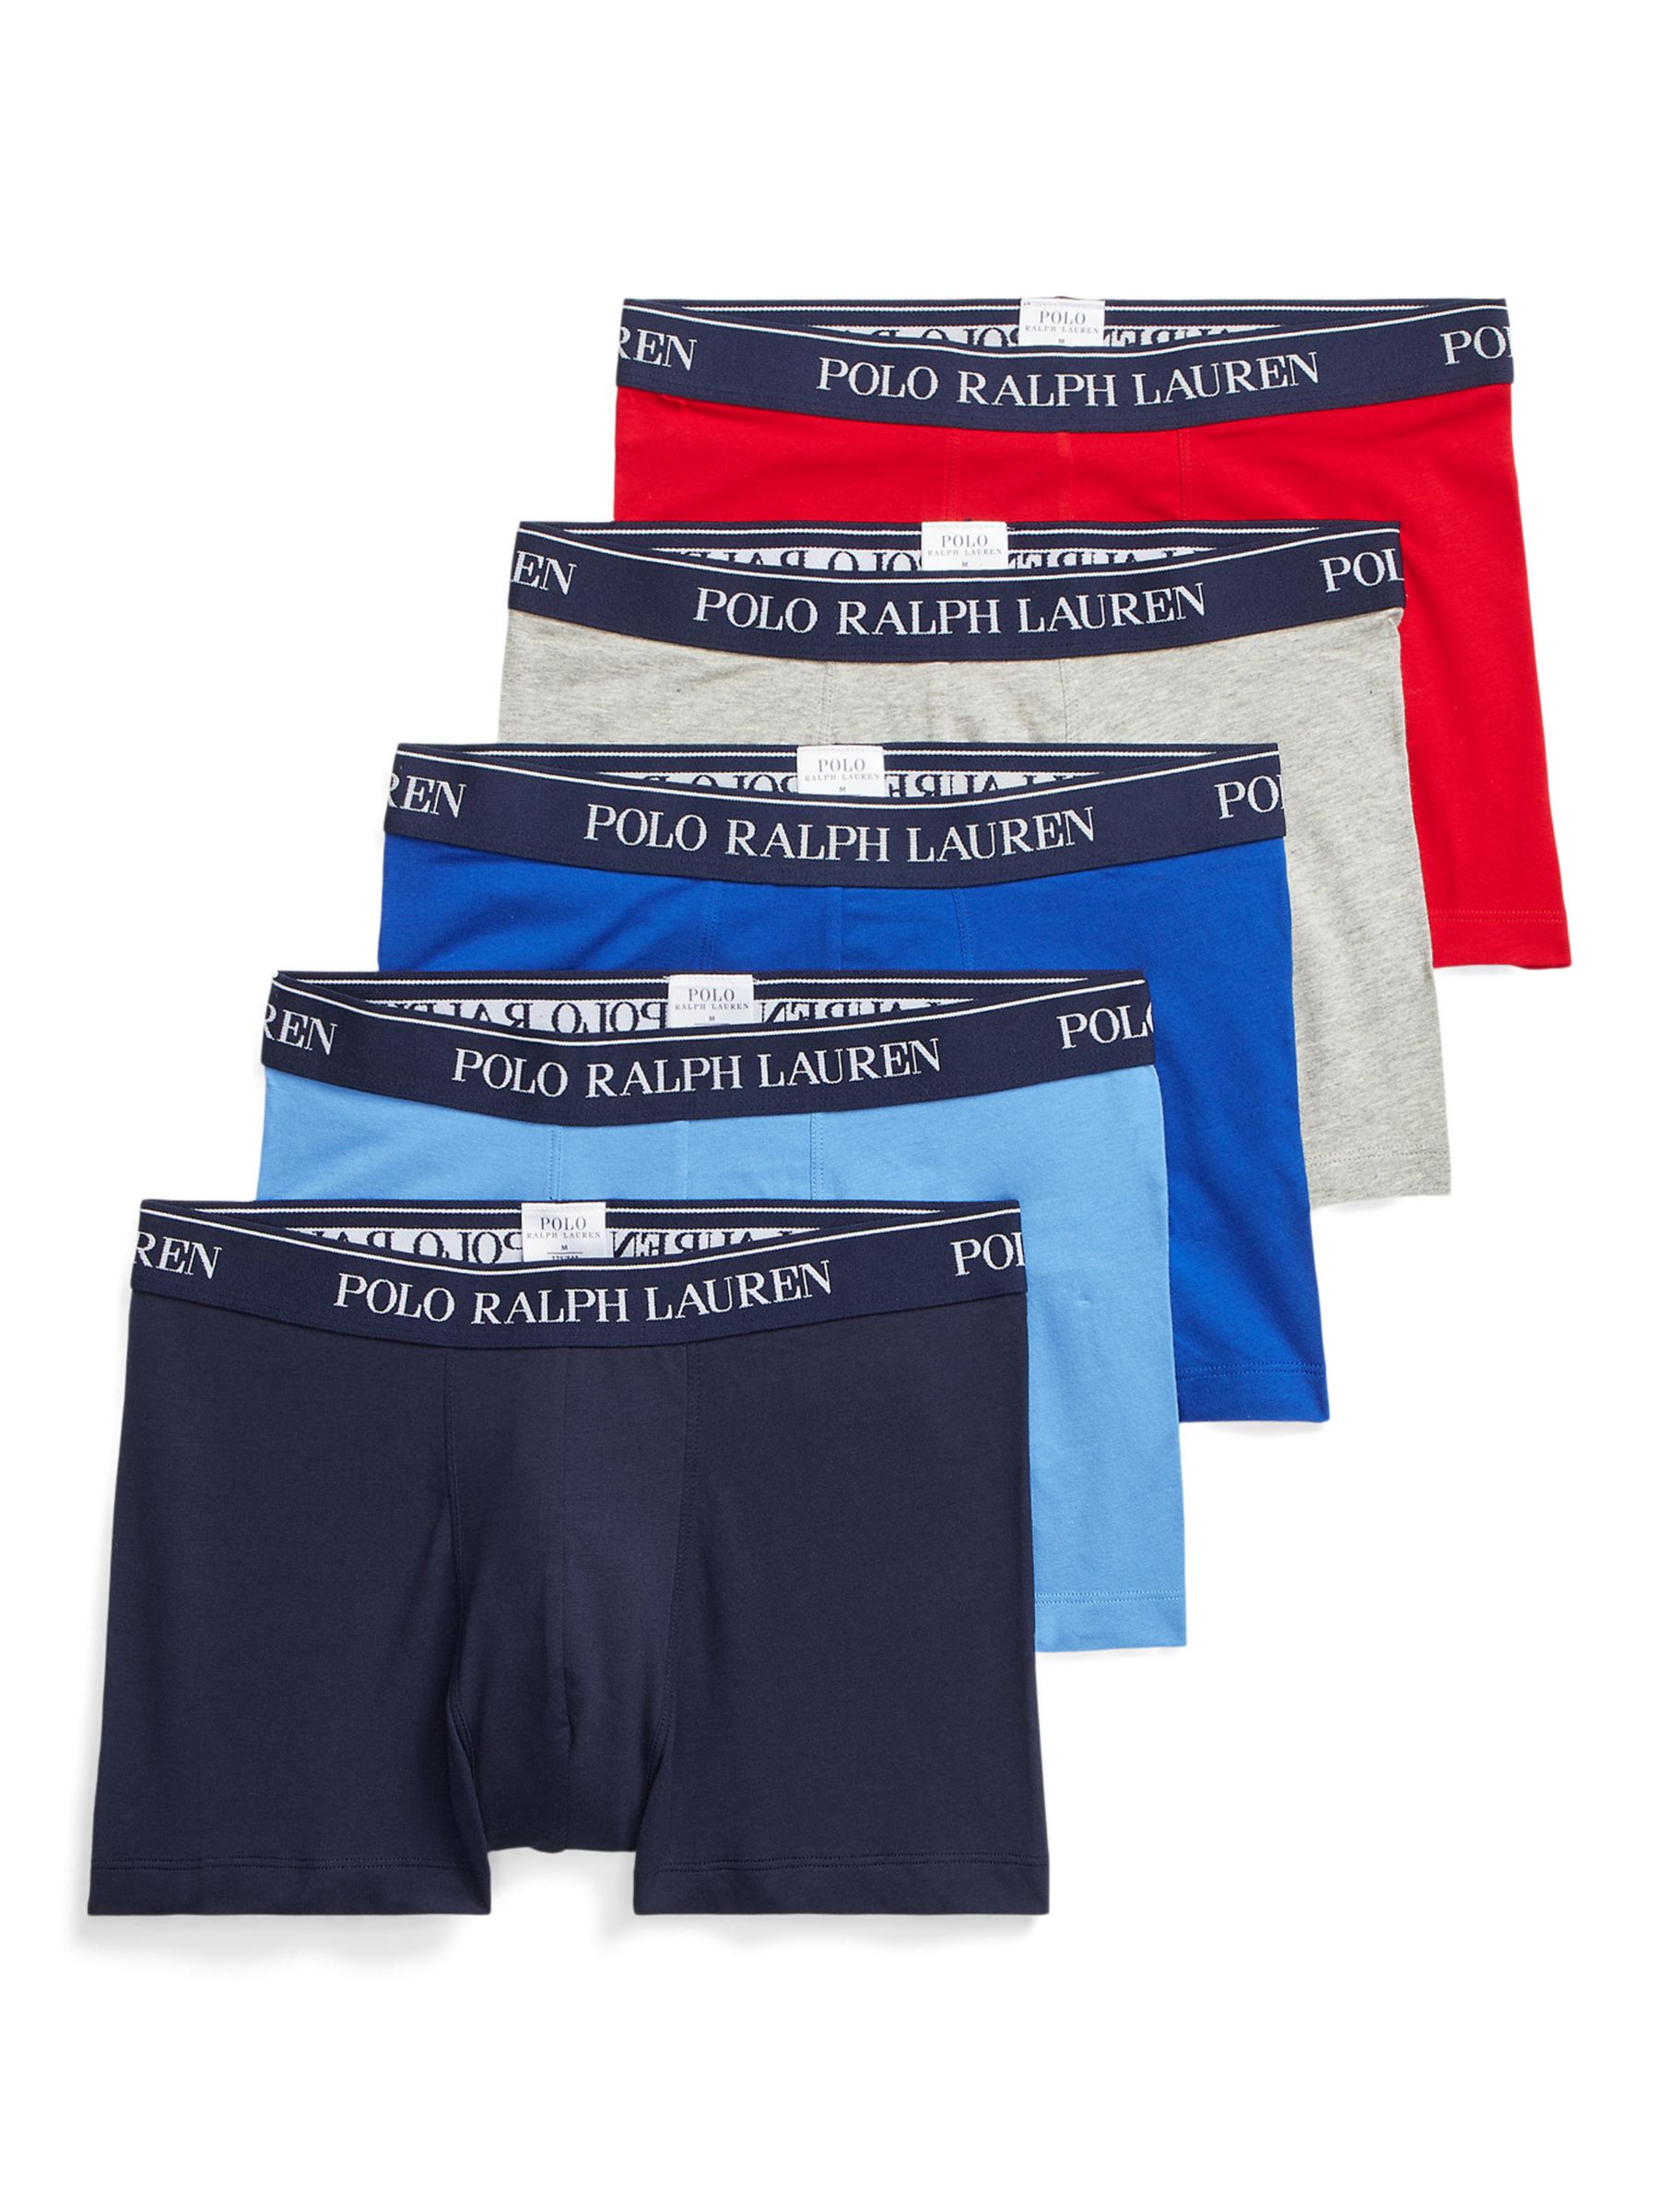 Polo Ralph Lauren Cotton Stretch Trunks, Pack of 5, Blue/Grey/Red Multi at  John Lewis & Partners